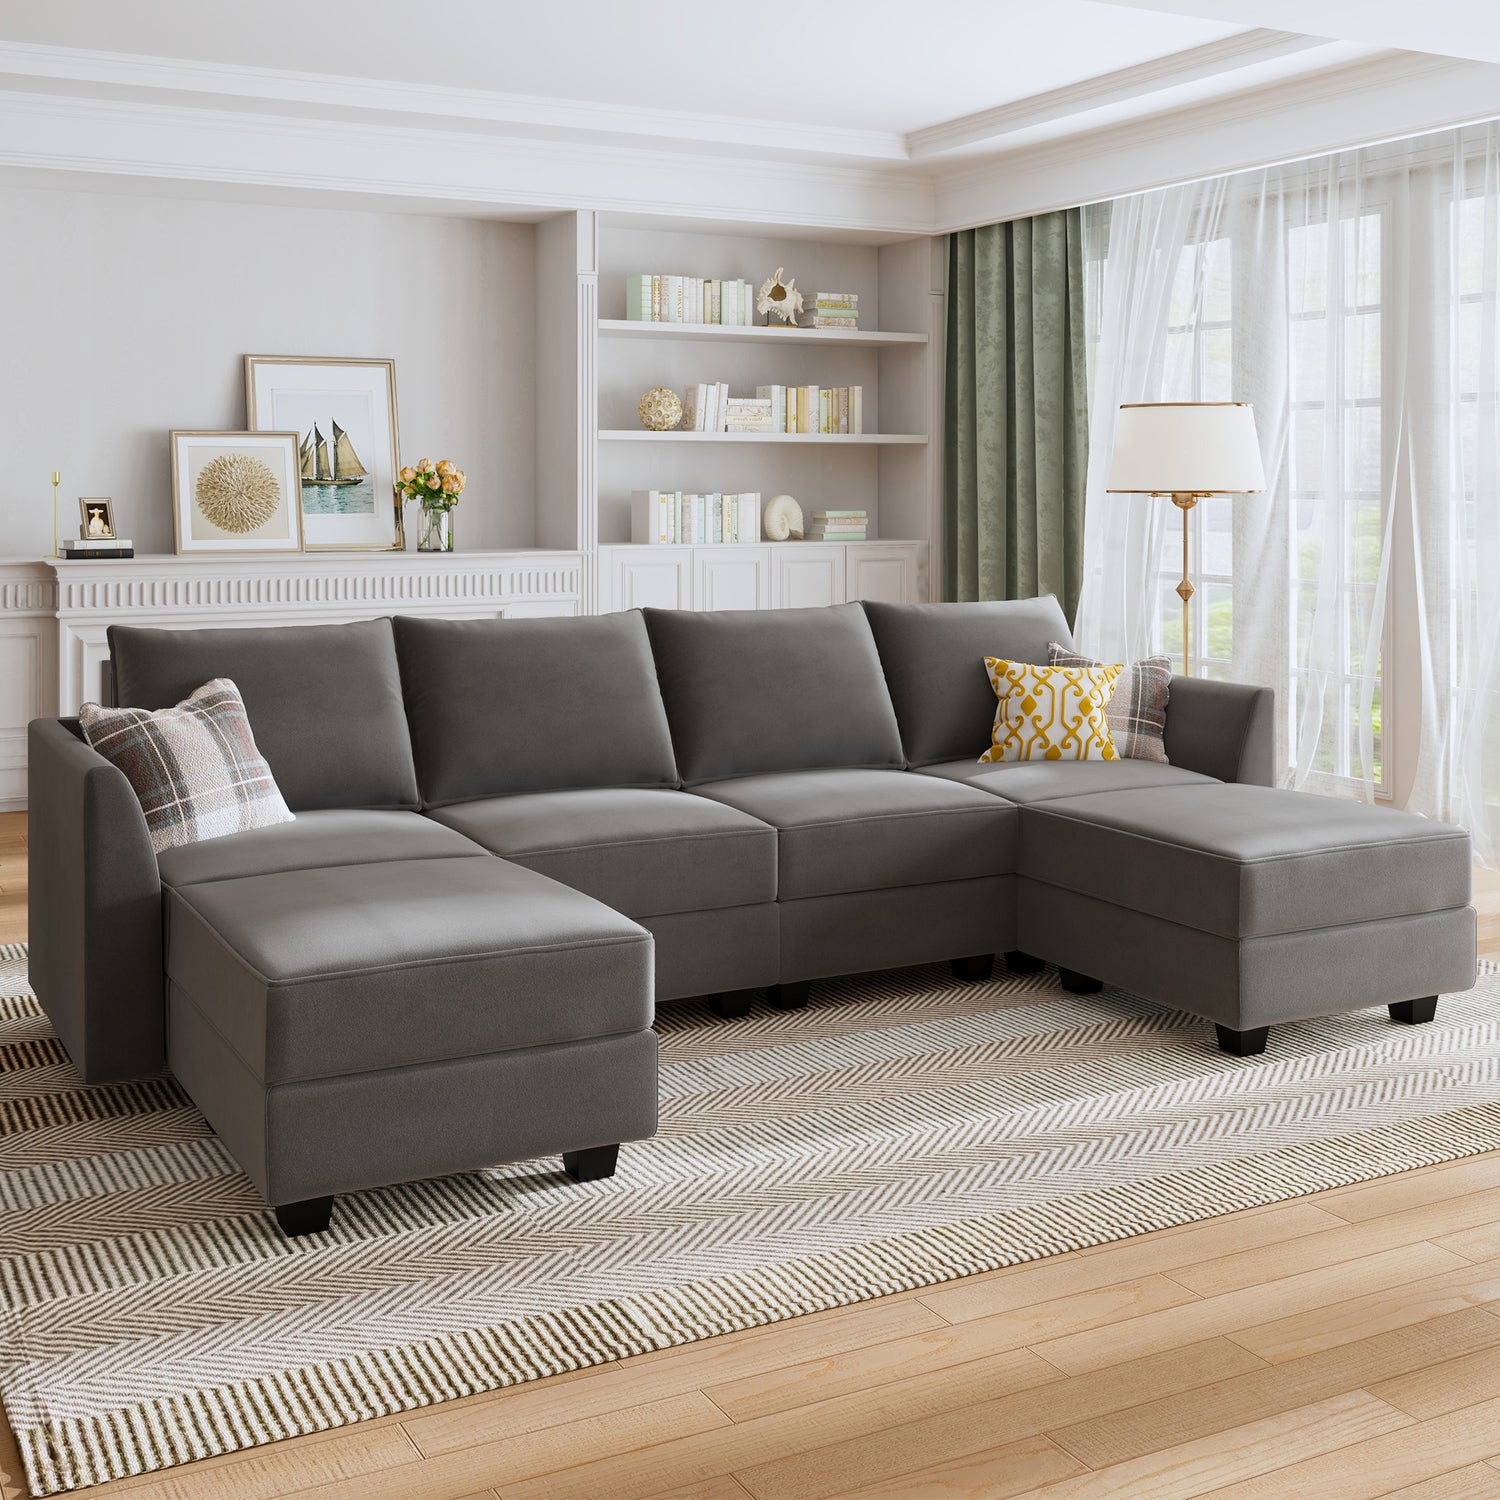 The Charming Velvet Sofas: A Timeless Blend of Luxury and Comfort